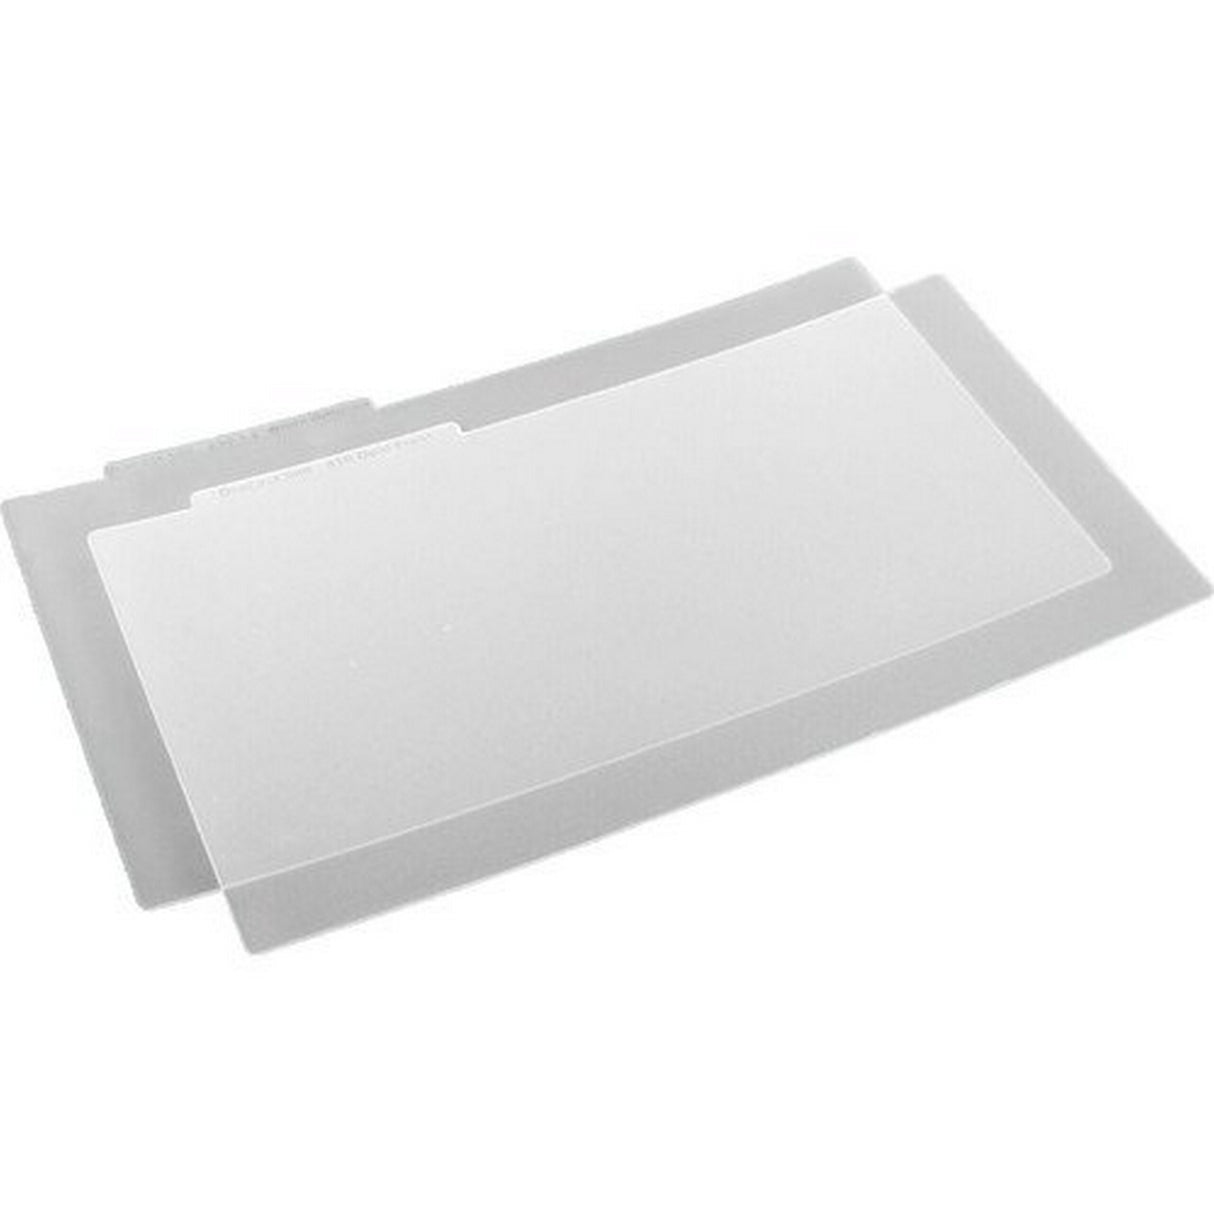 Dracast FTRP-LED160X2 Diffusion Filter Set for LED160 Light, 2-Piece